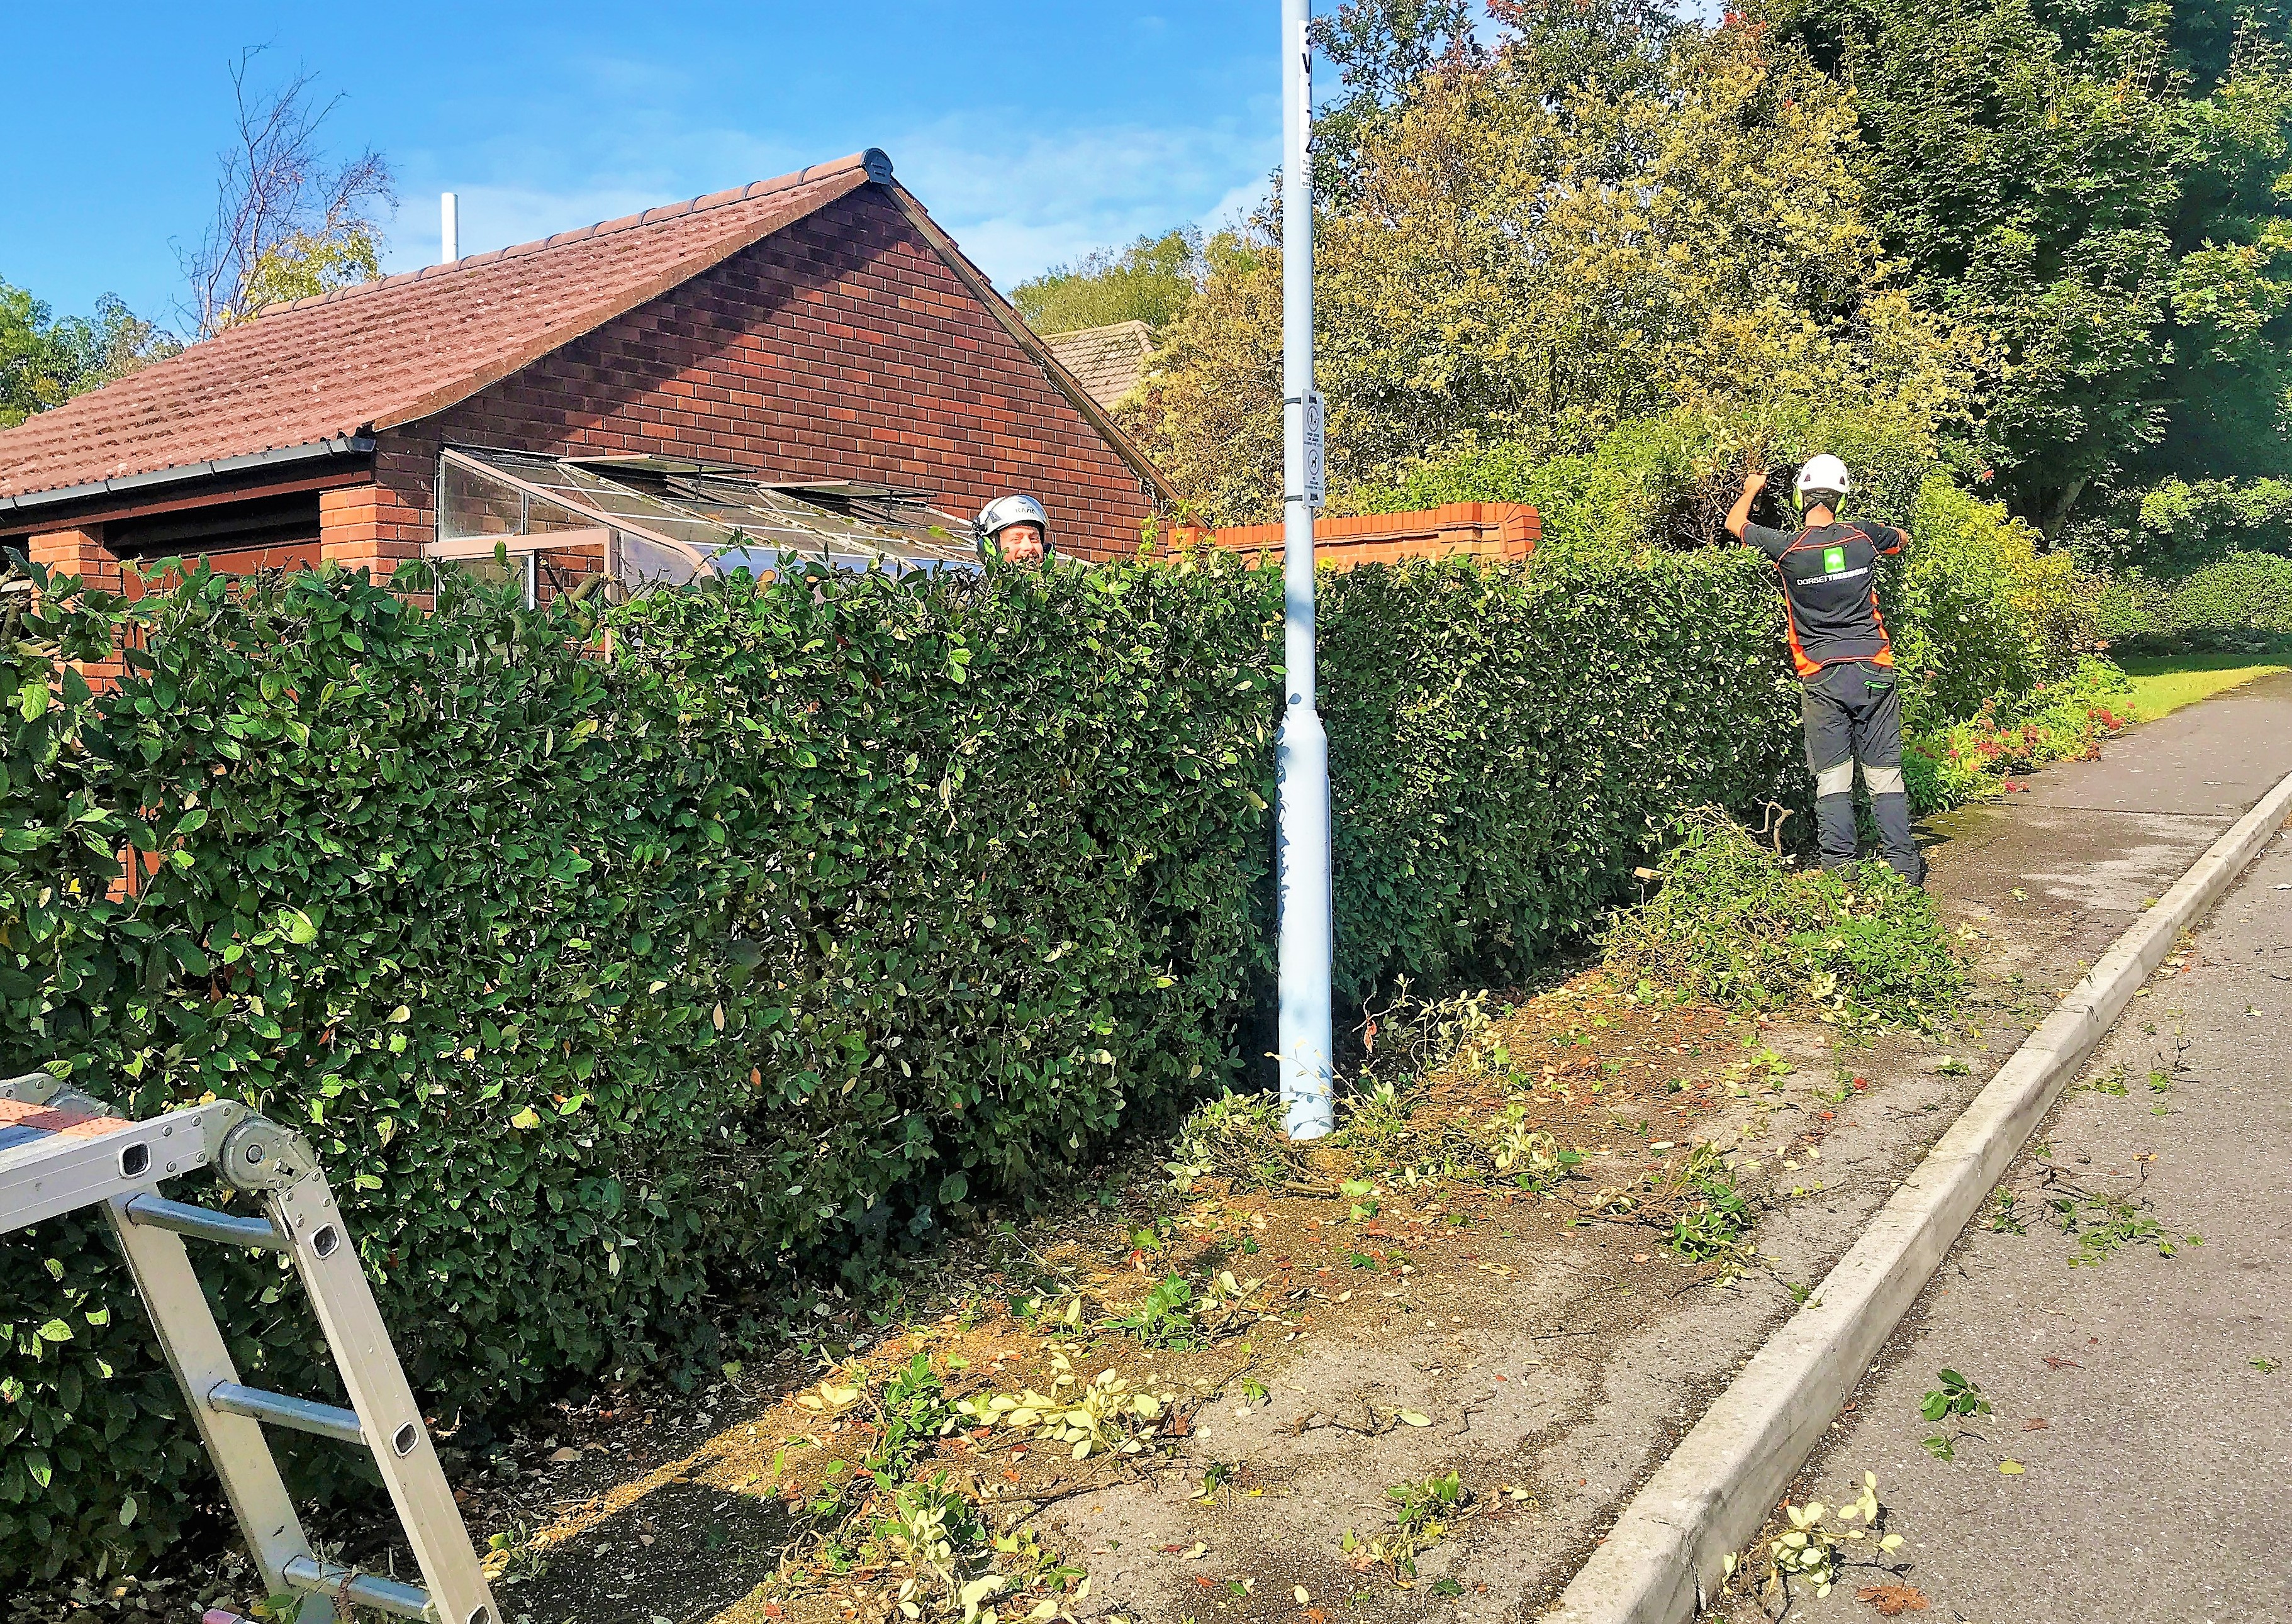 Hedge maintenance services covering hedge trimming, hedge removal, hedge reduction, hedge stump removal in Weymouth Dorchester Portland around south Dorset - Dorset Treeworx Ltd